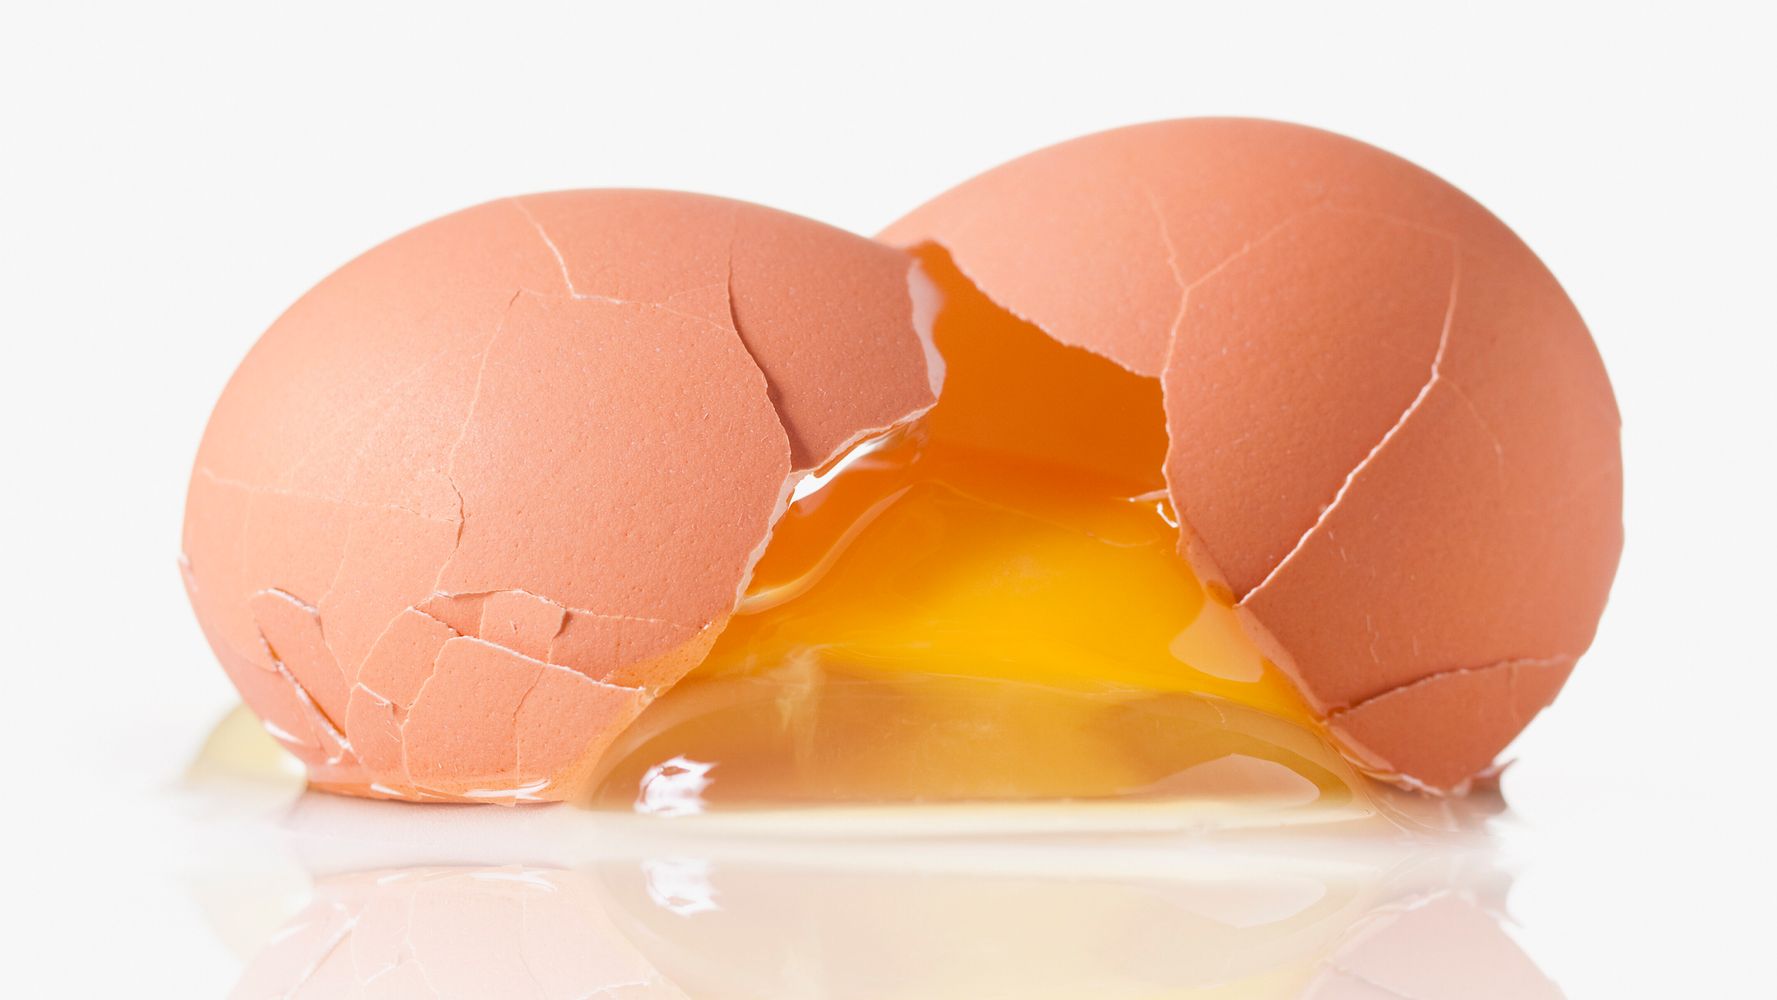 19 Relatable Tweets About The Struggle Of Cracking Eggs